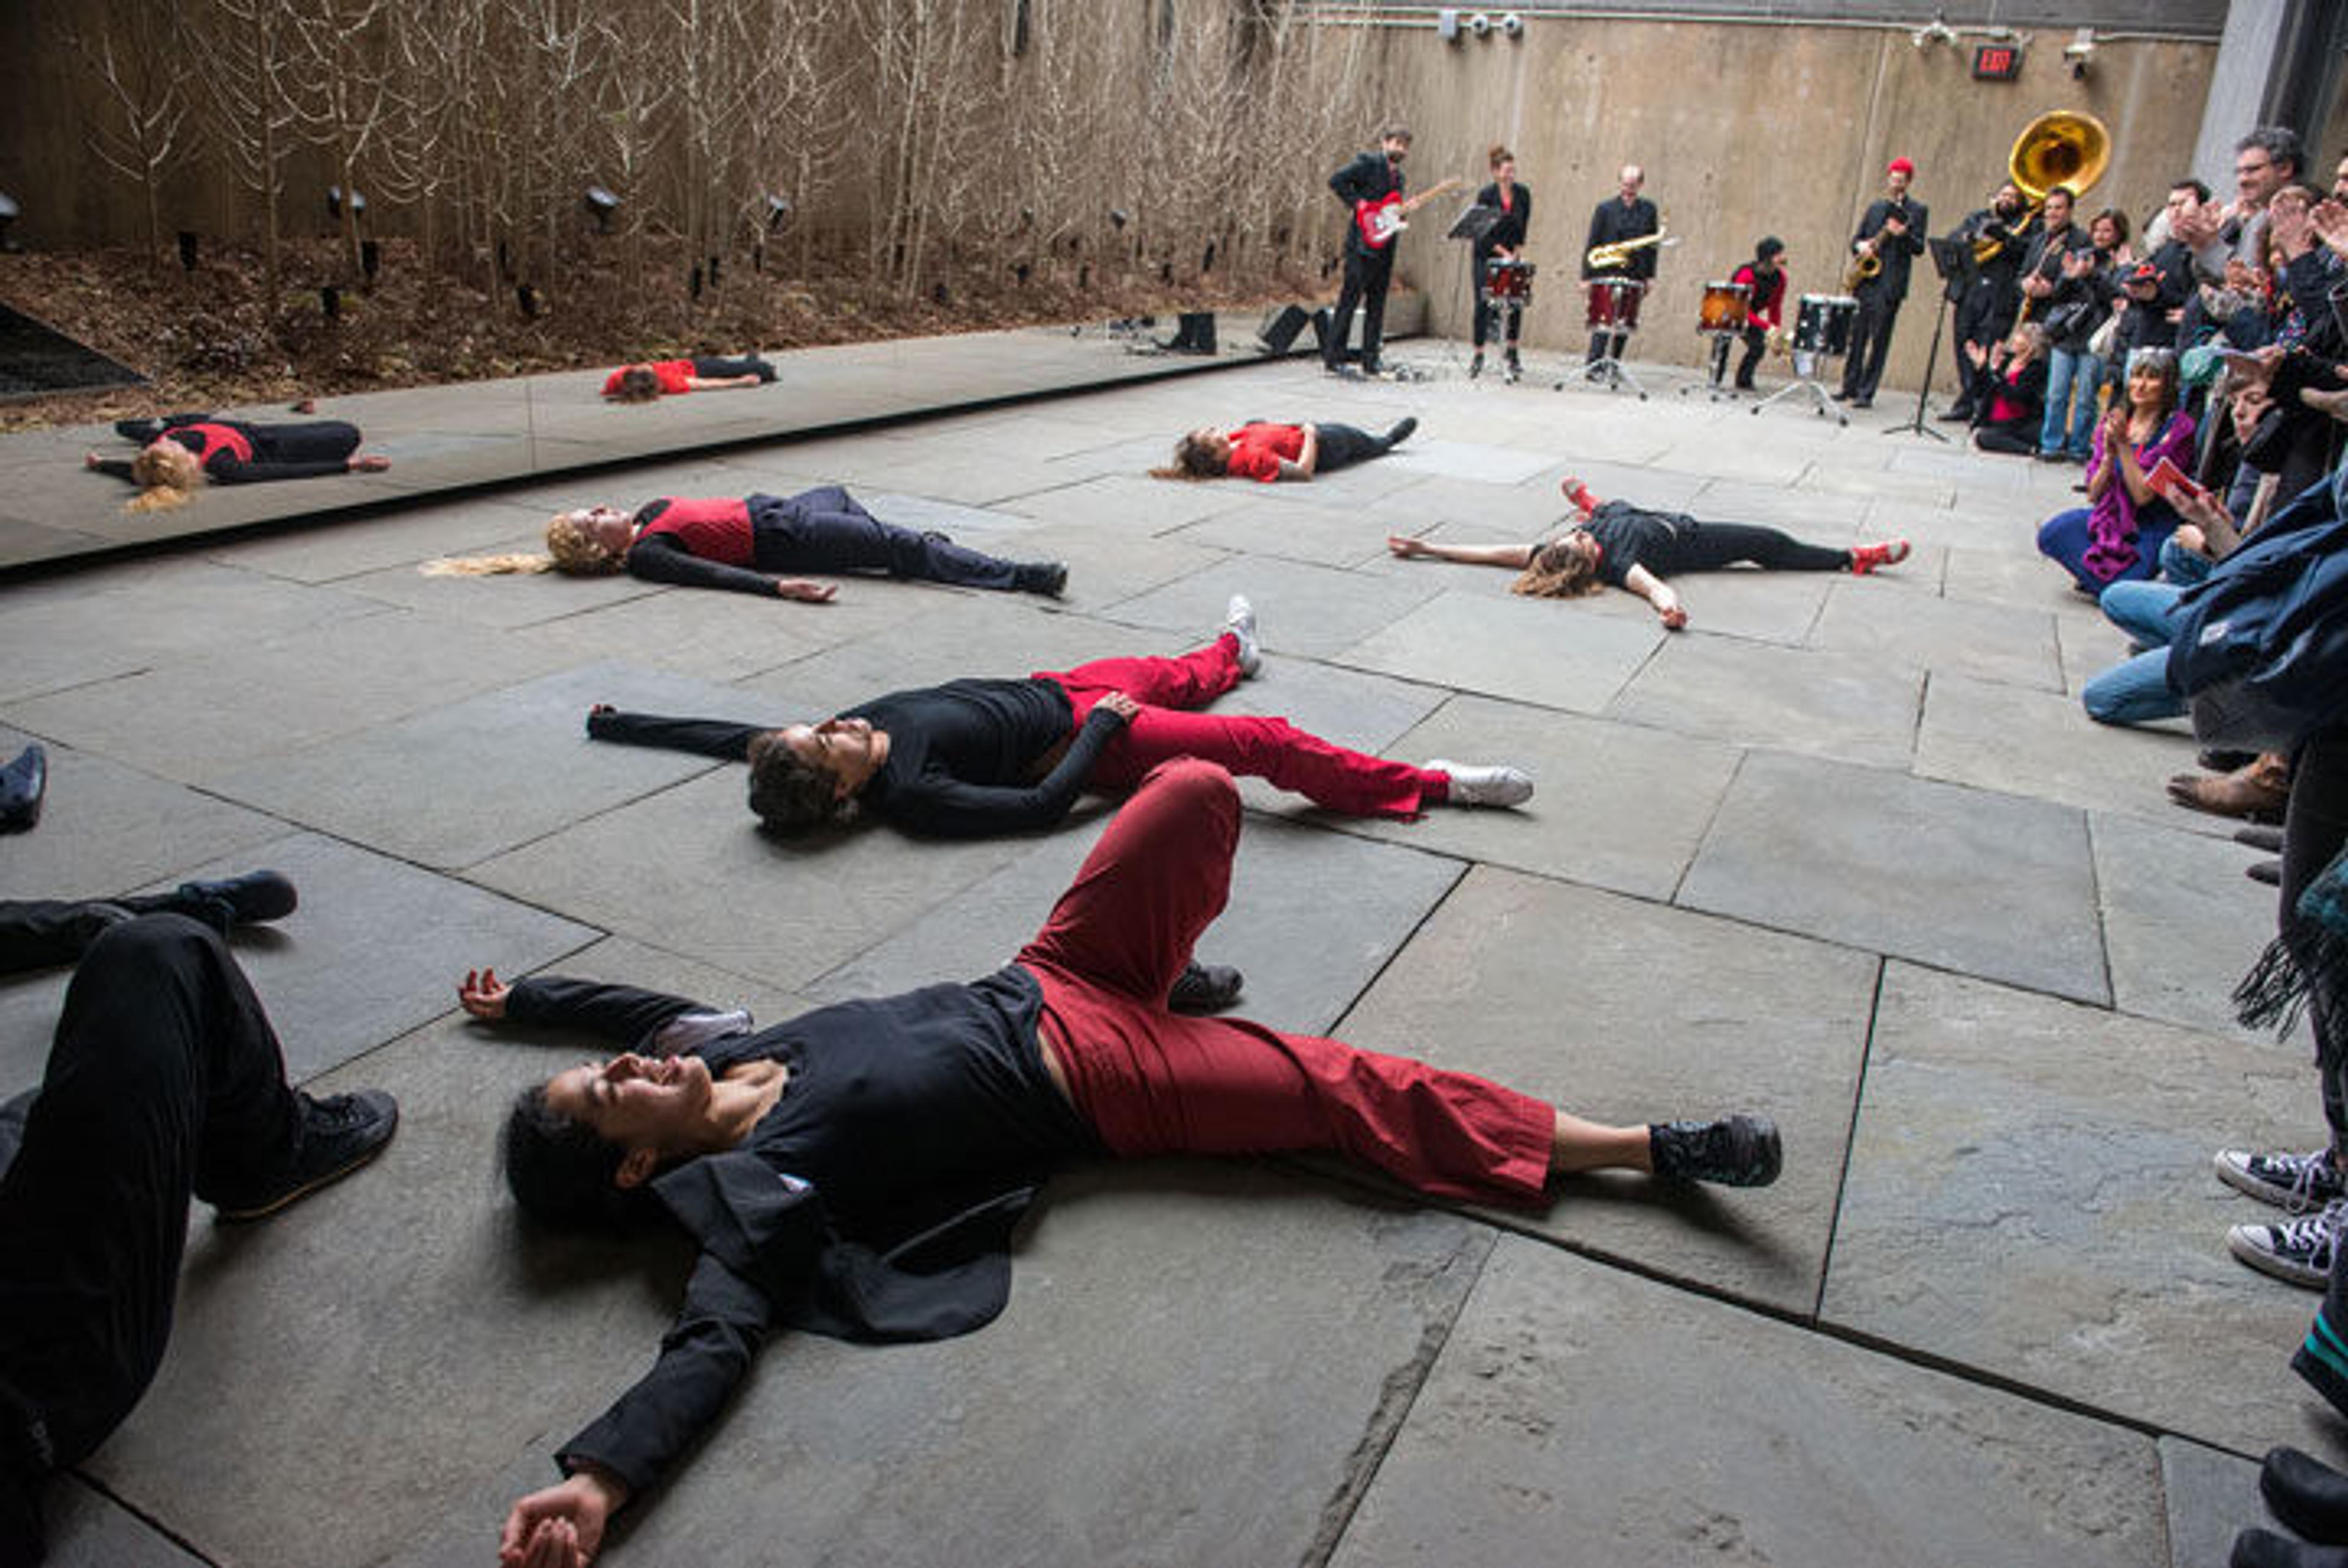 A group of dancers perform in the outdoor space at The Met Breuer